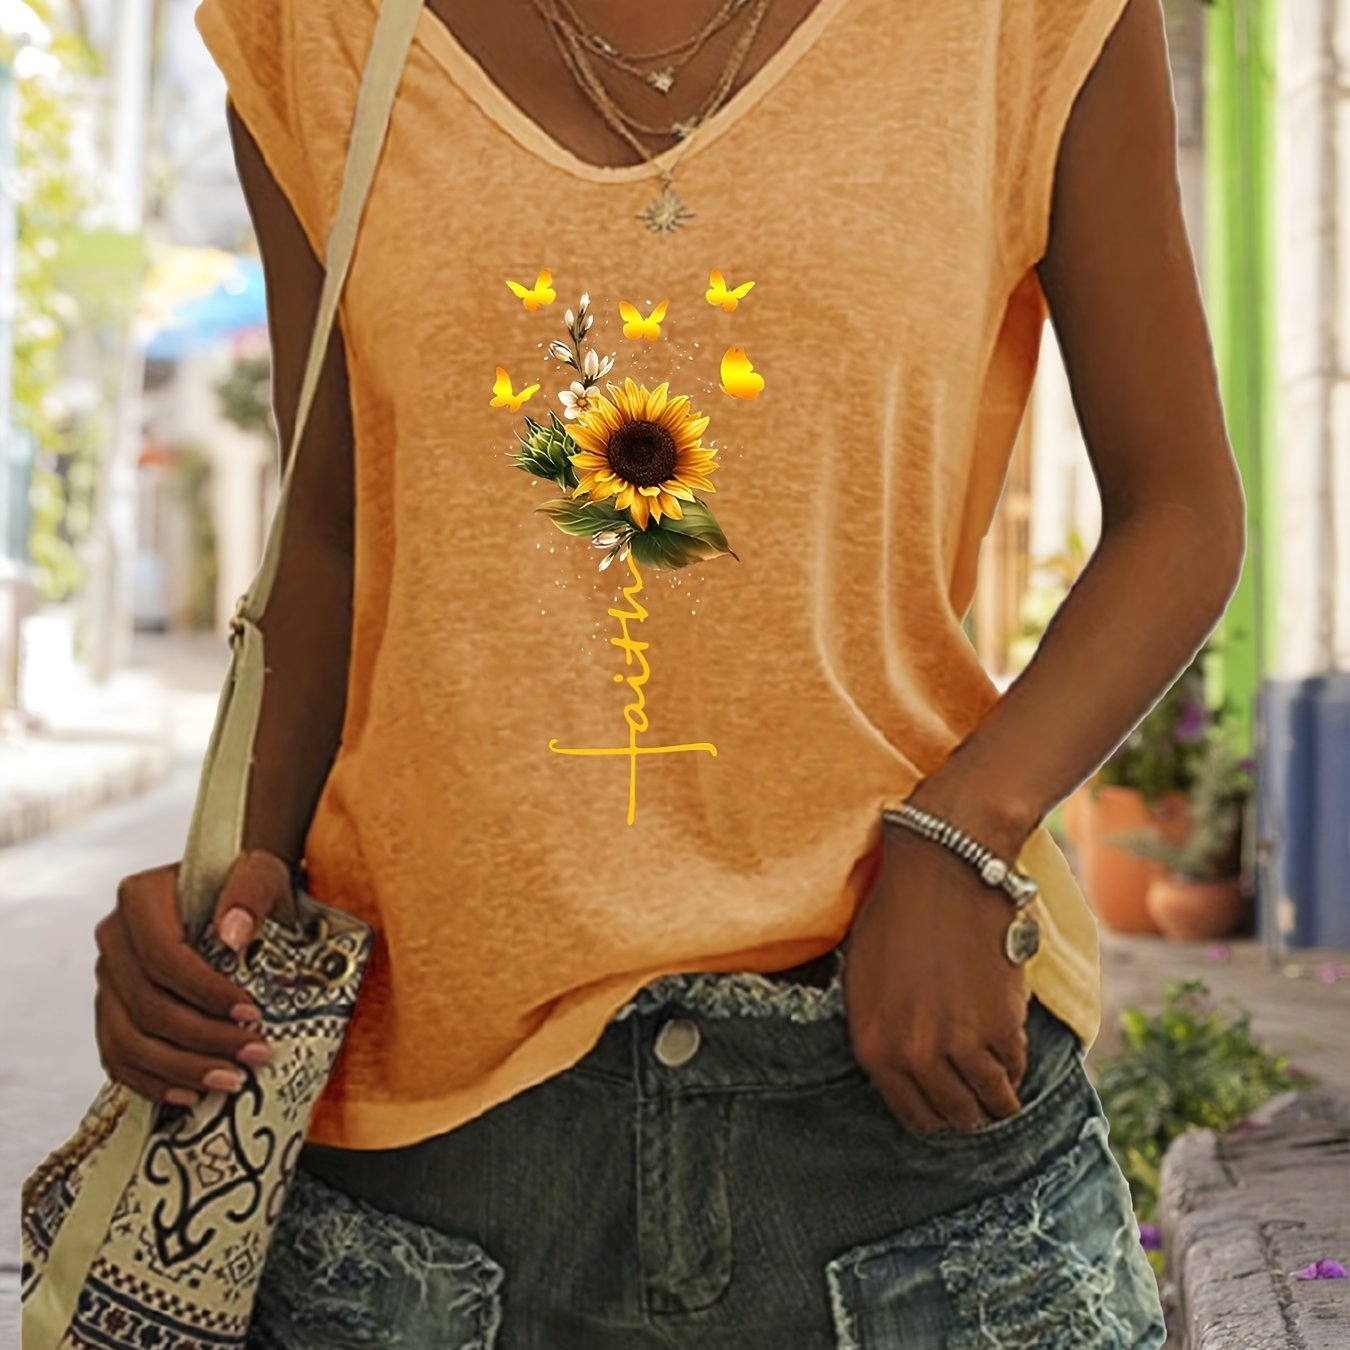 「lovevop」Sunflower Print Tank Top, Sleeveless Casual Top For Spring & Summer, Women's Clothing